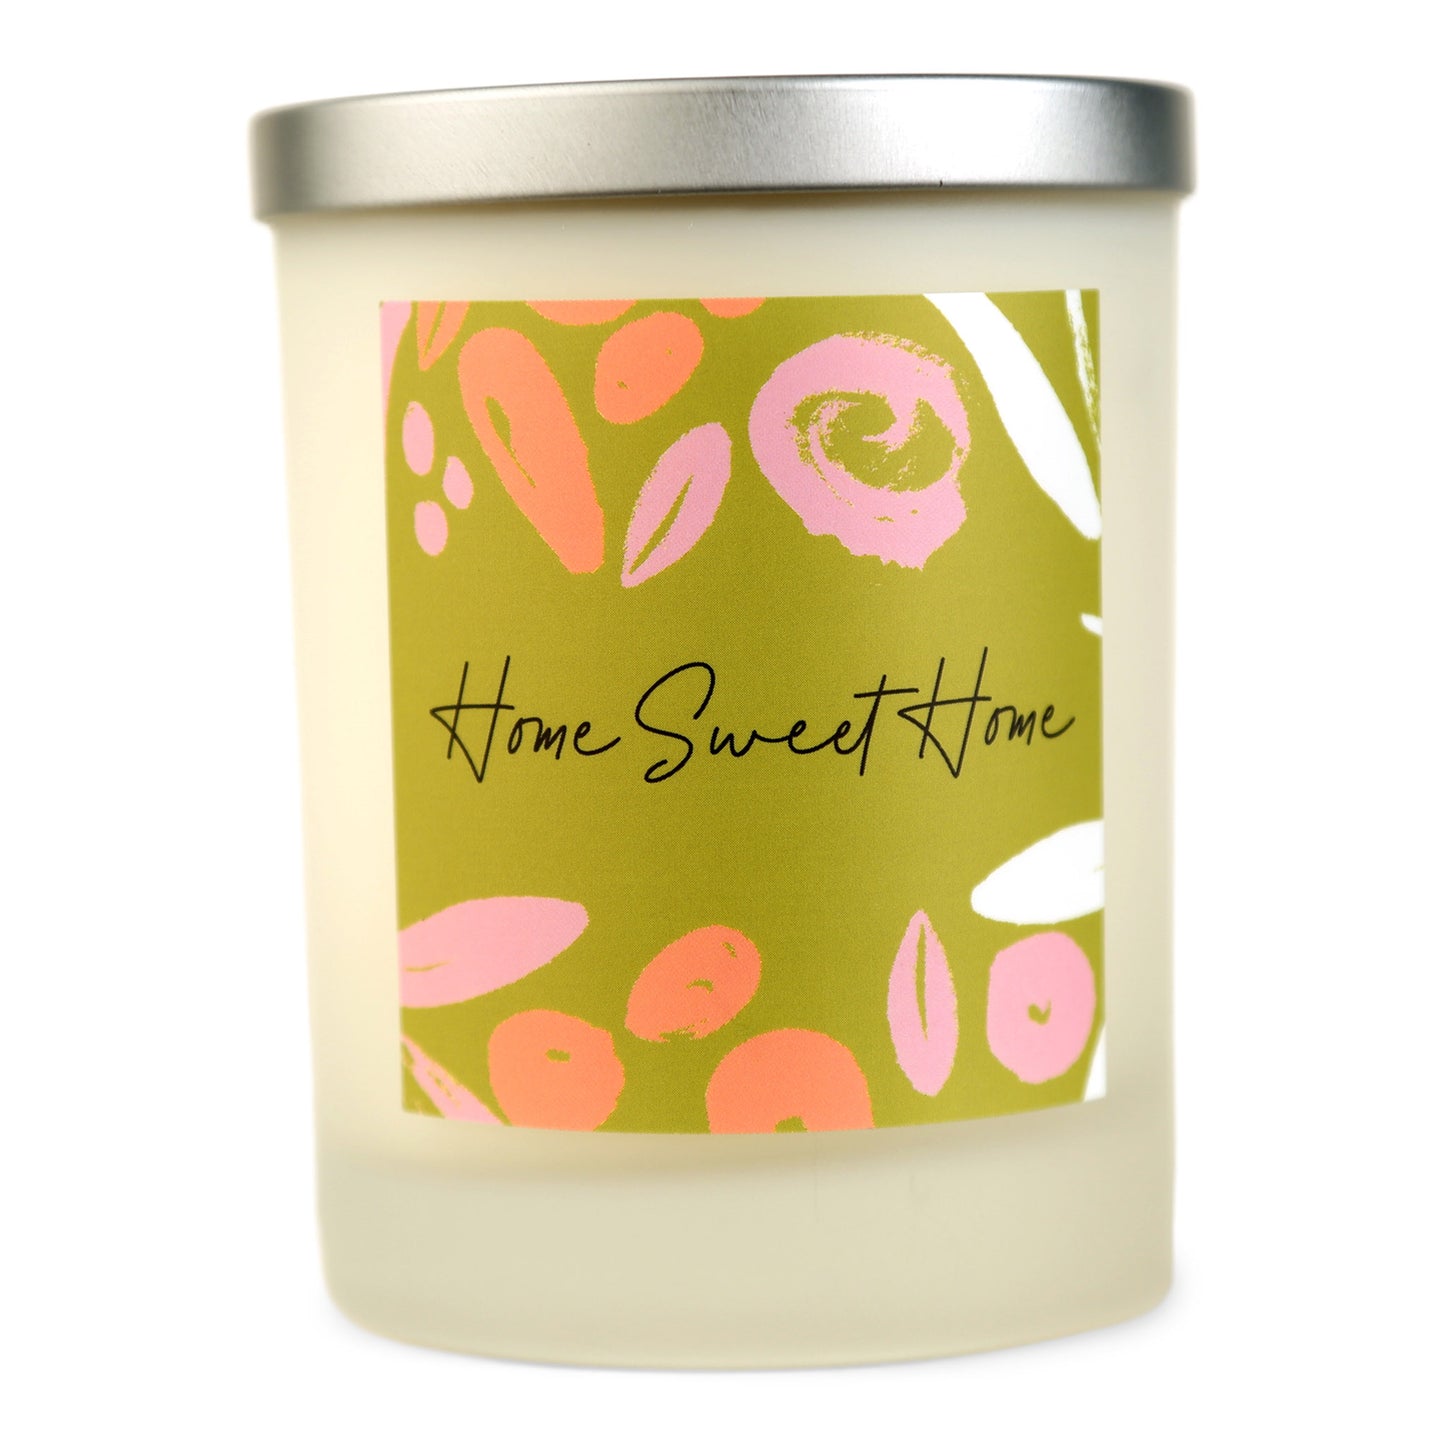 On Sale Kindness Collection Soy Wax Candle